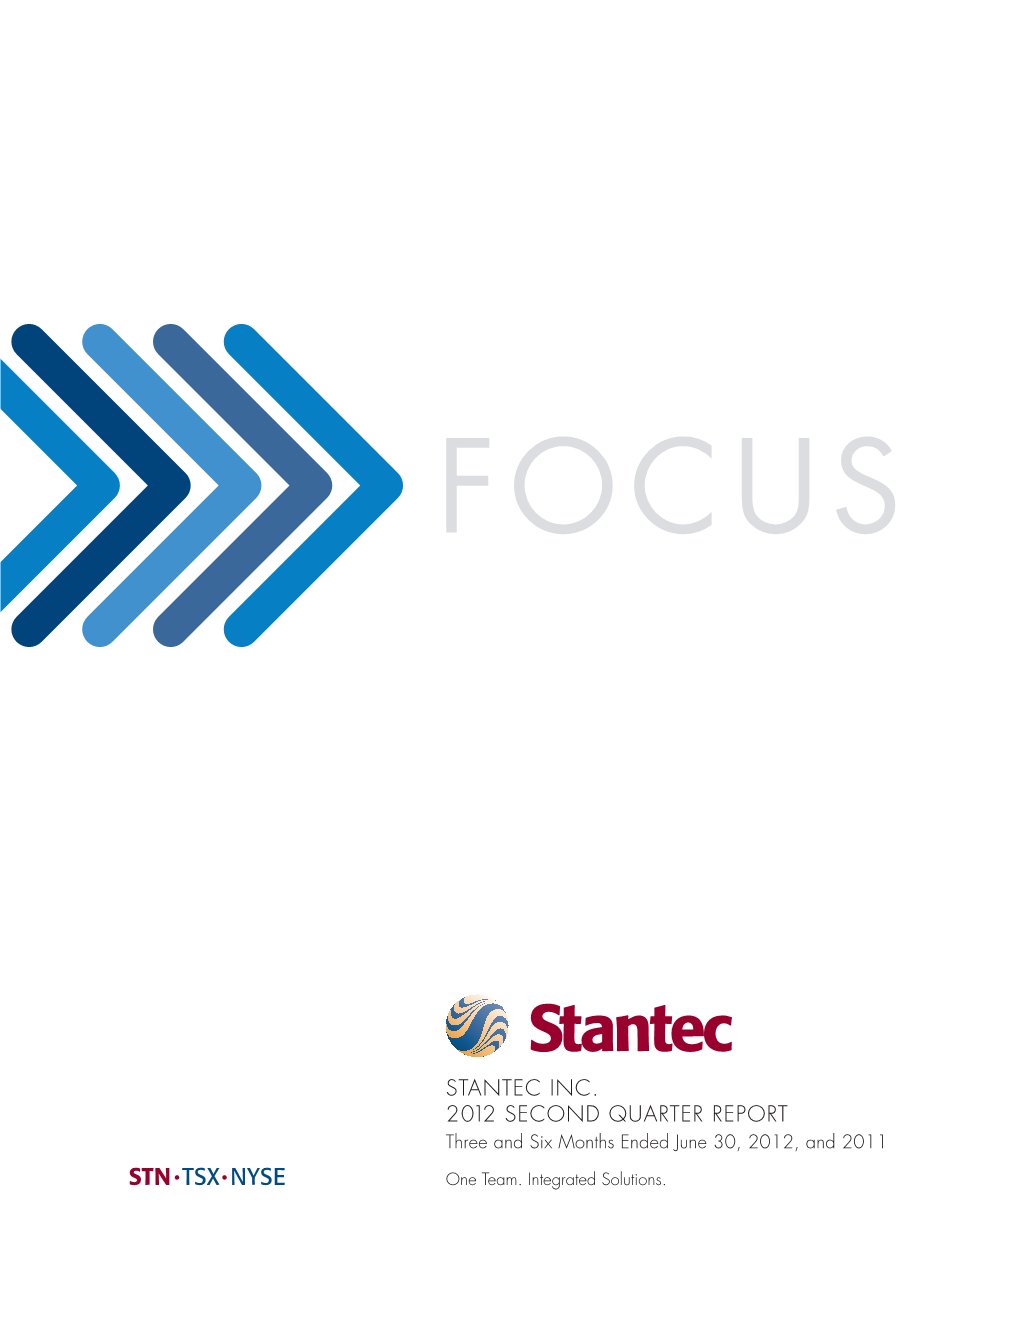 STANTEC INC. 2012 SECOND QUARTER REPORT Three and Six Months Ended June 30, 2012, and 2011